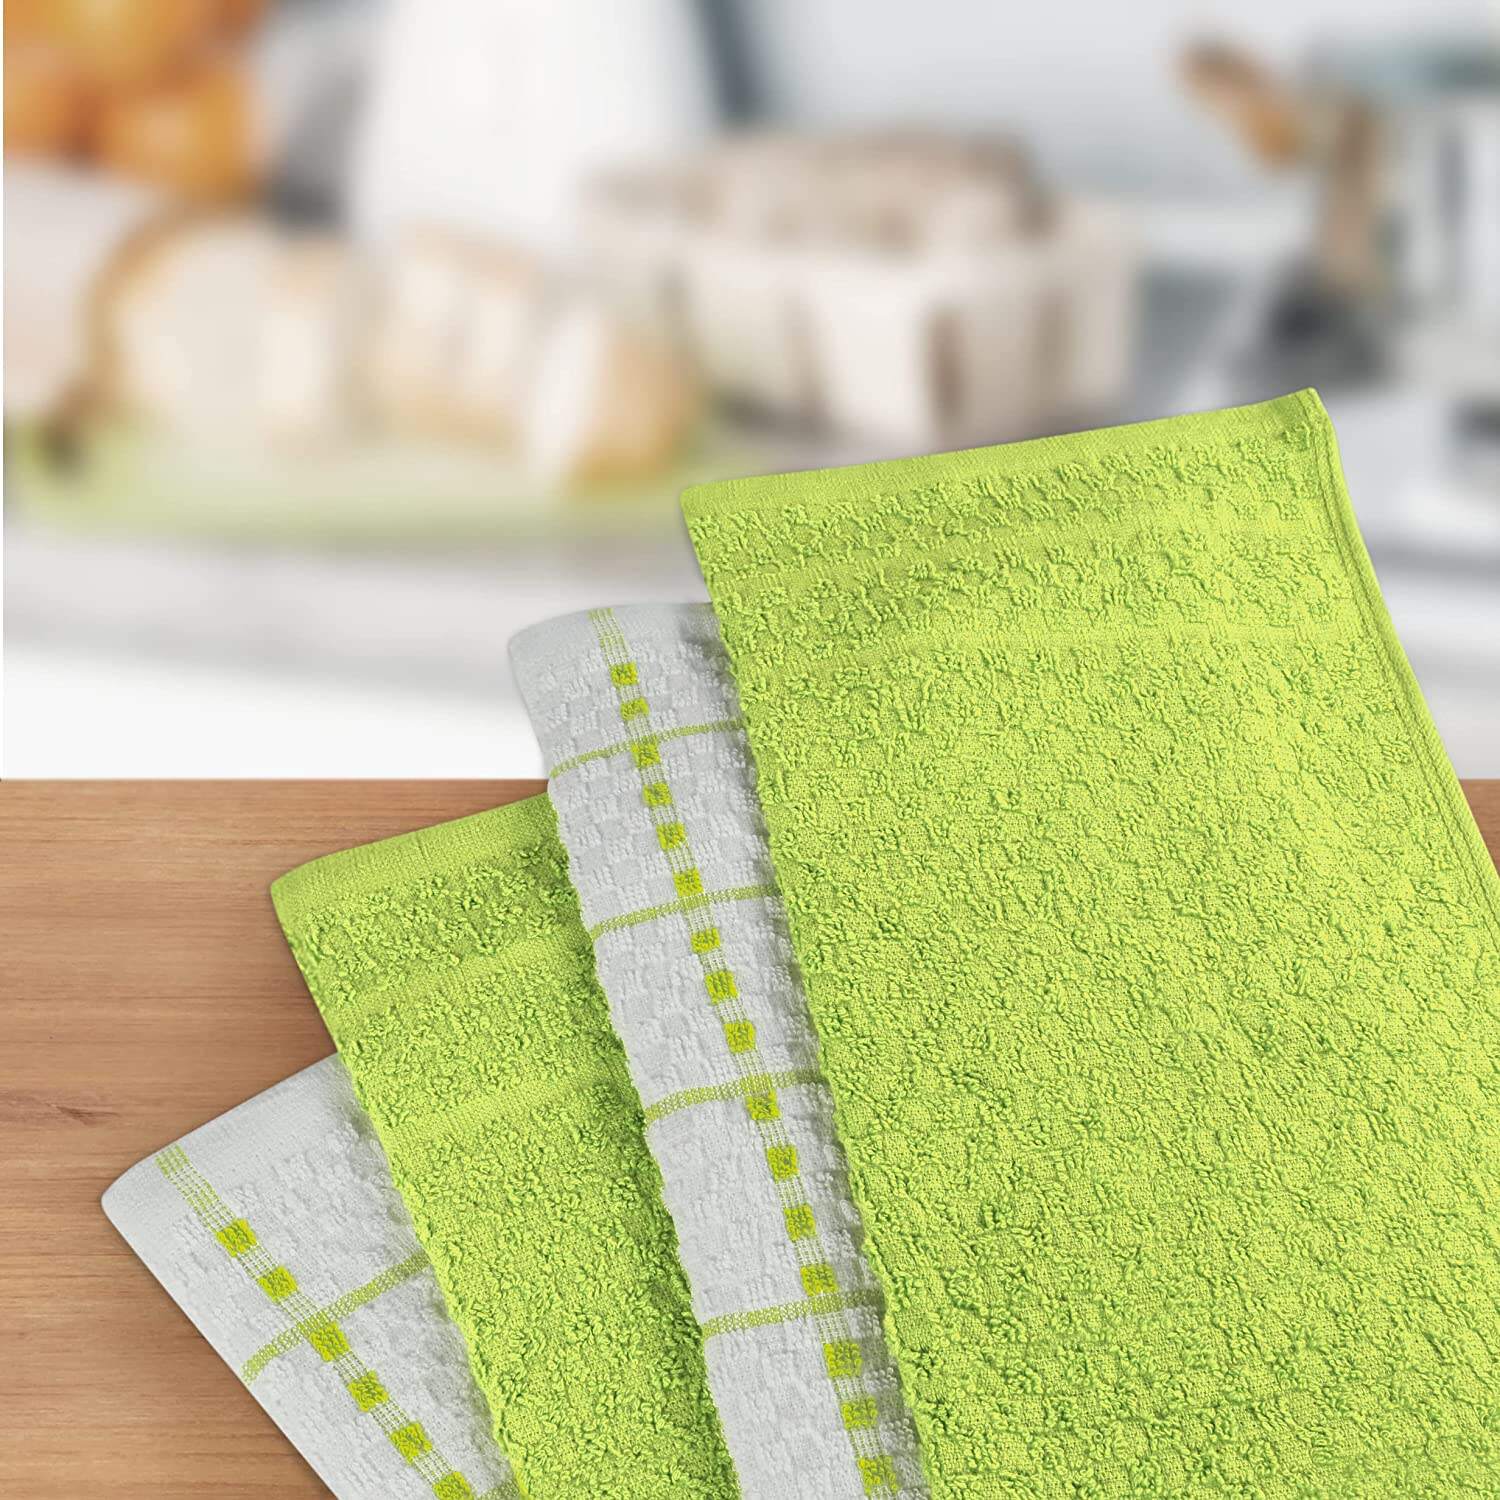 Towels Kitchen Towels, Pack of 4, 12 x 12 Inches, Spun Cotton Super Soft  and Absorbent Black Dish Towels, Tea Towels and Bar Towels